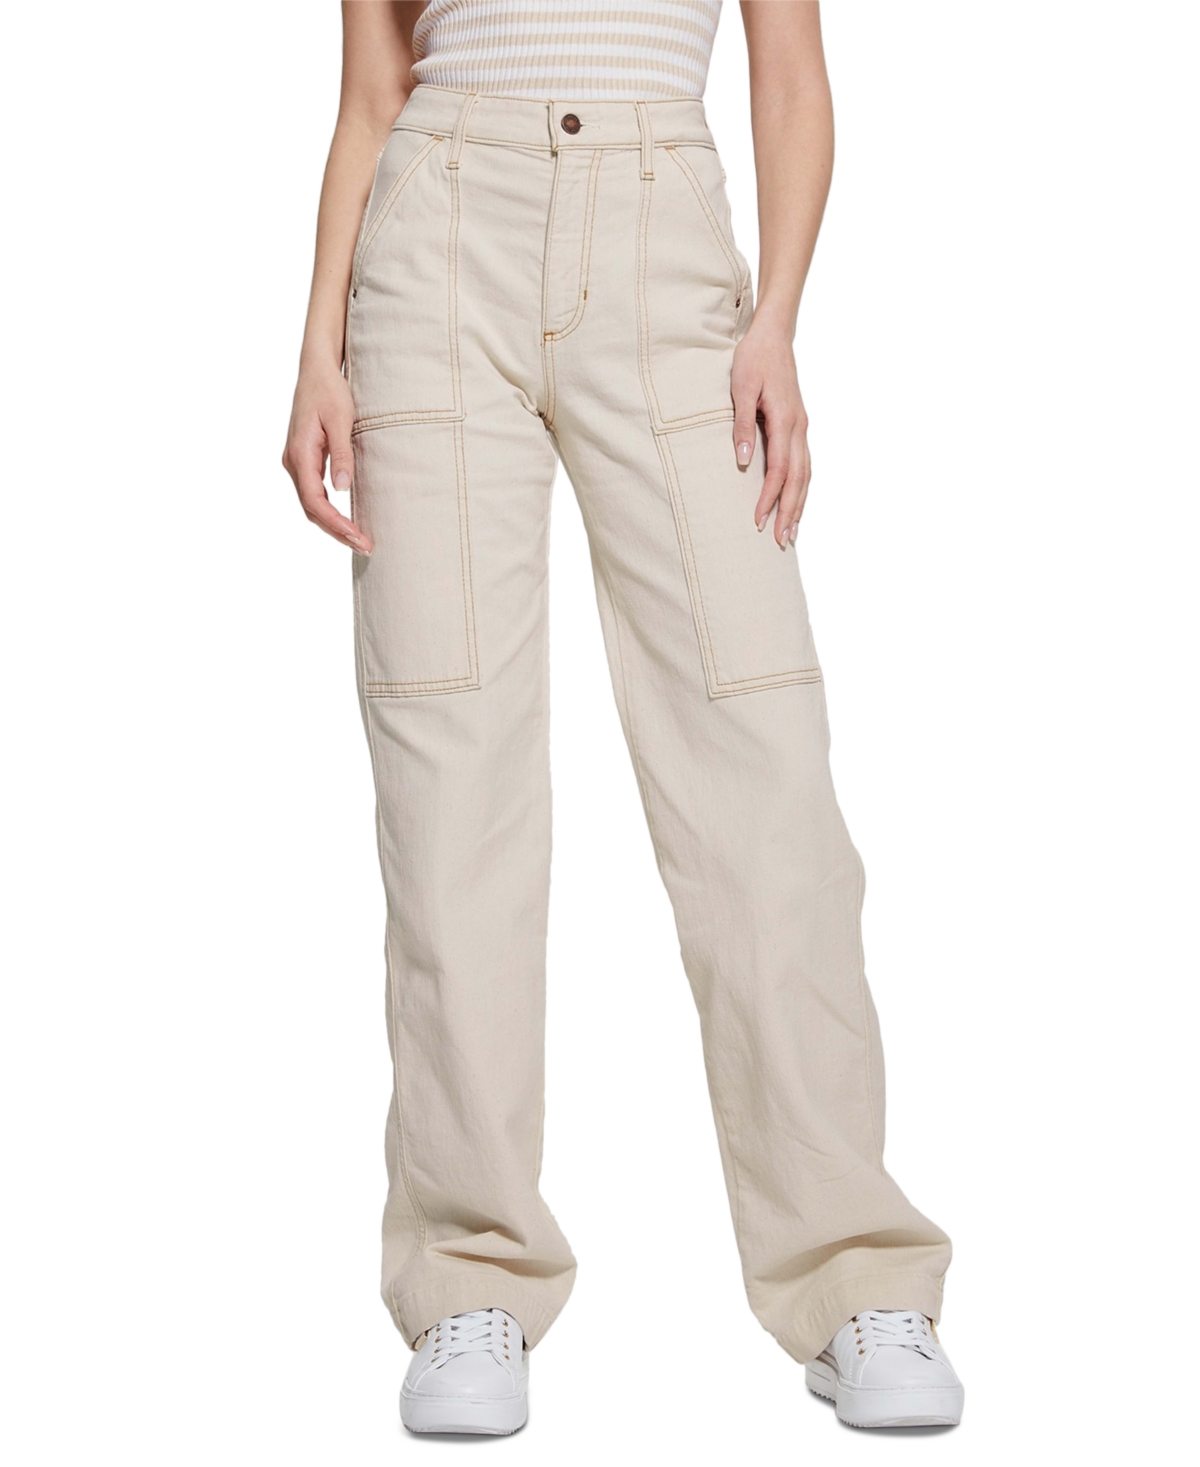 Women's Carrie Carpenter Jeans - RINSE WASH